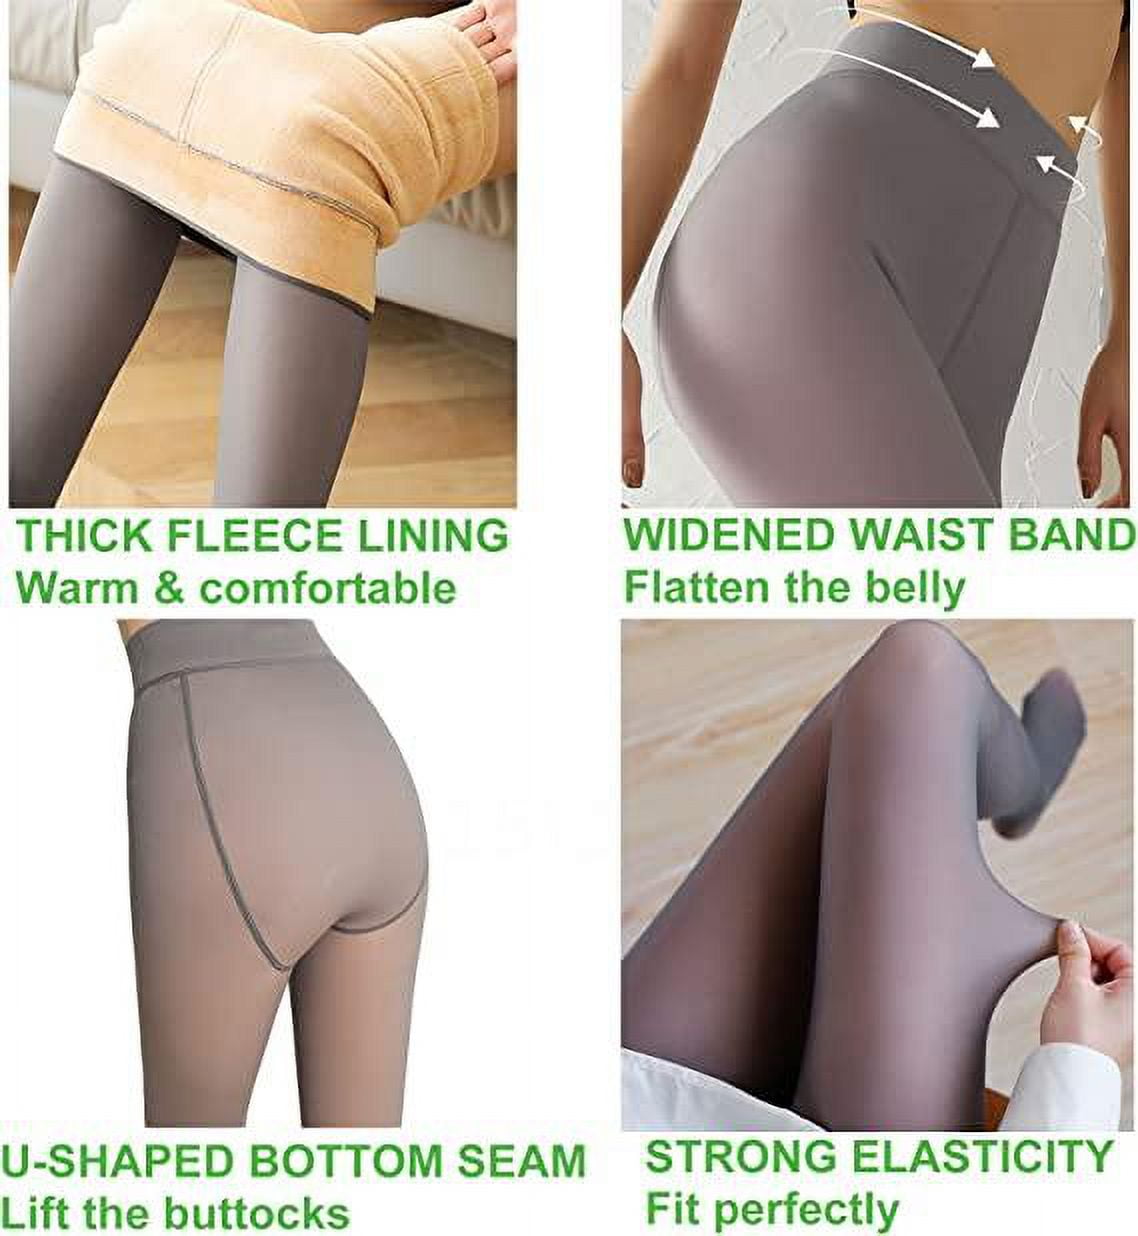 shuwee Fleece Lined Tights Women Leggings Thermal Pantyhose Fake  Translucent Tights Opaque High Waisted Winter Warm Sheer Tight